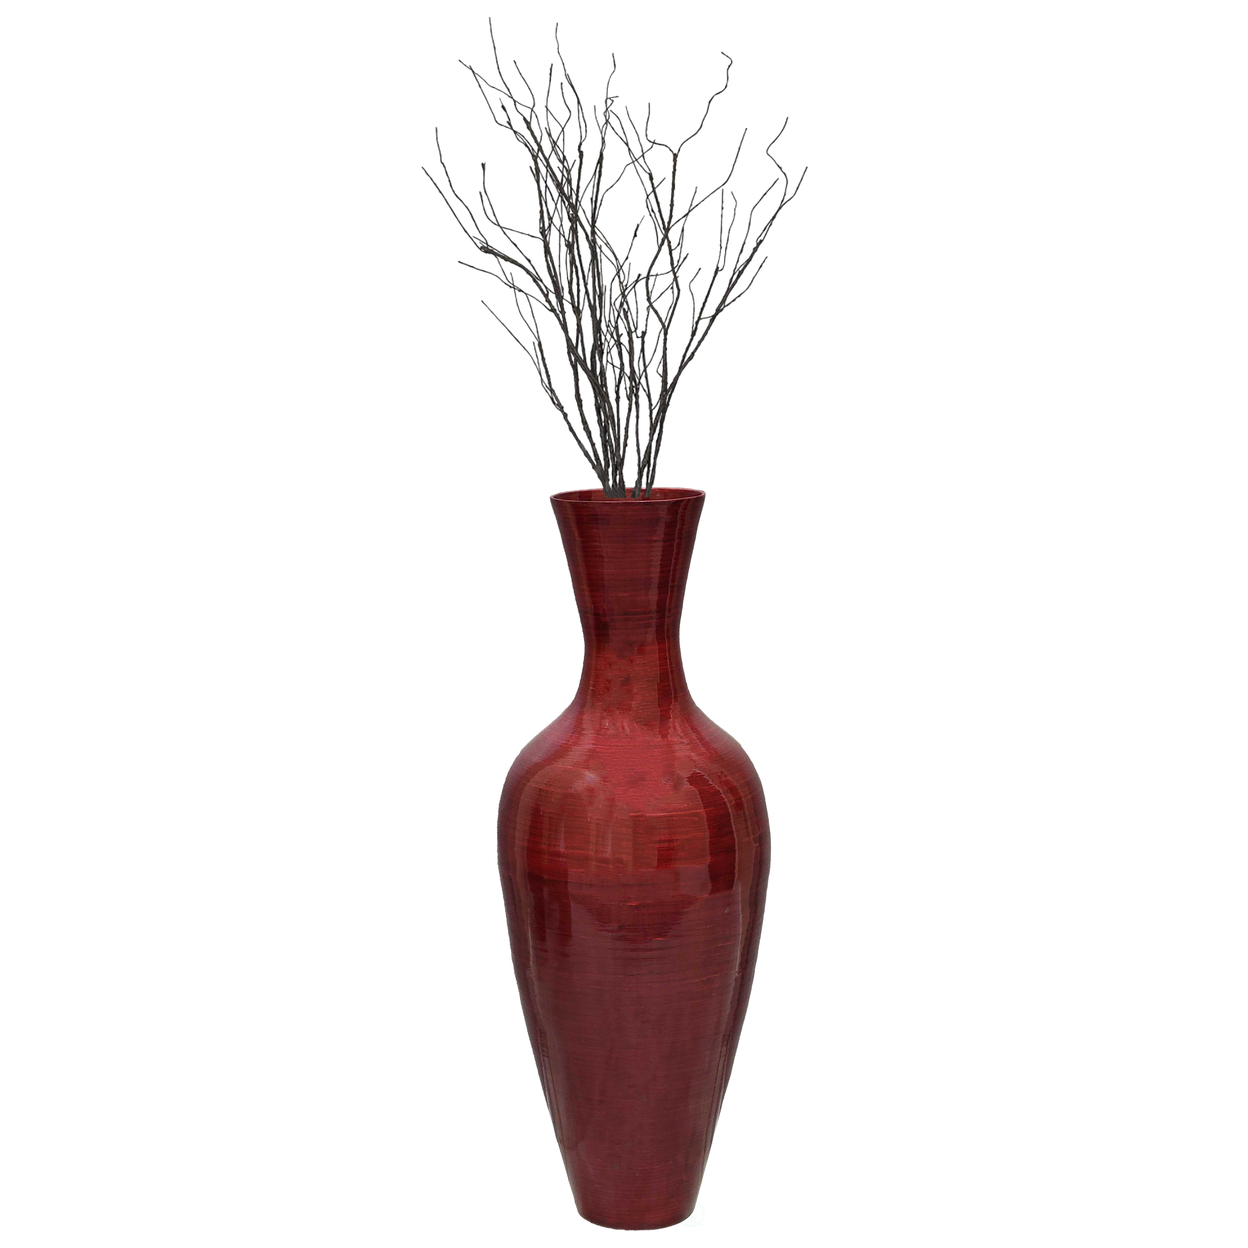 Vase Filled With Branches: 37â Red Bamboo Tall Floor Vase And 37â Twig Branch For Elegant And Rustic Touches, For Any Dining Or Living Room